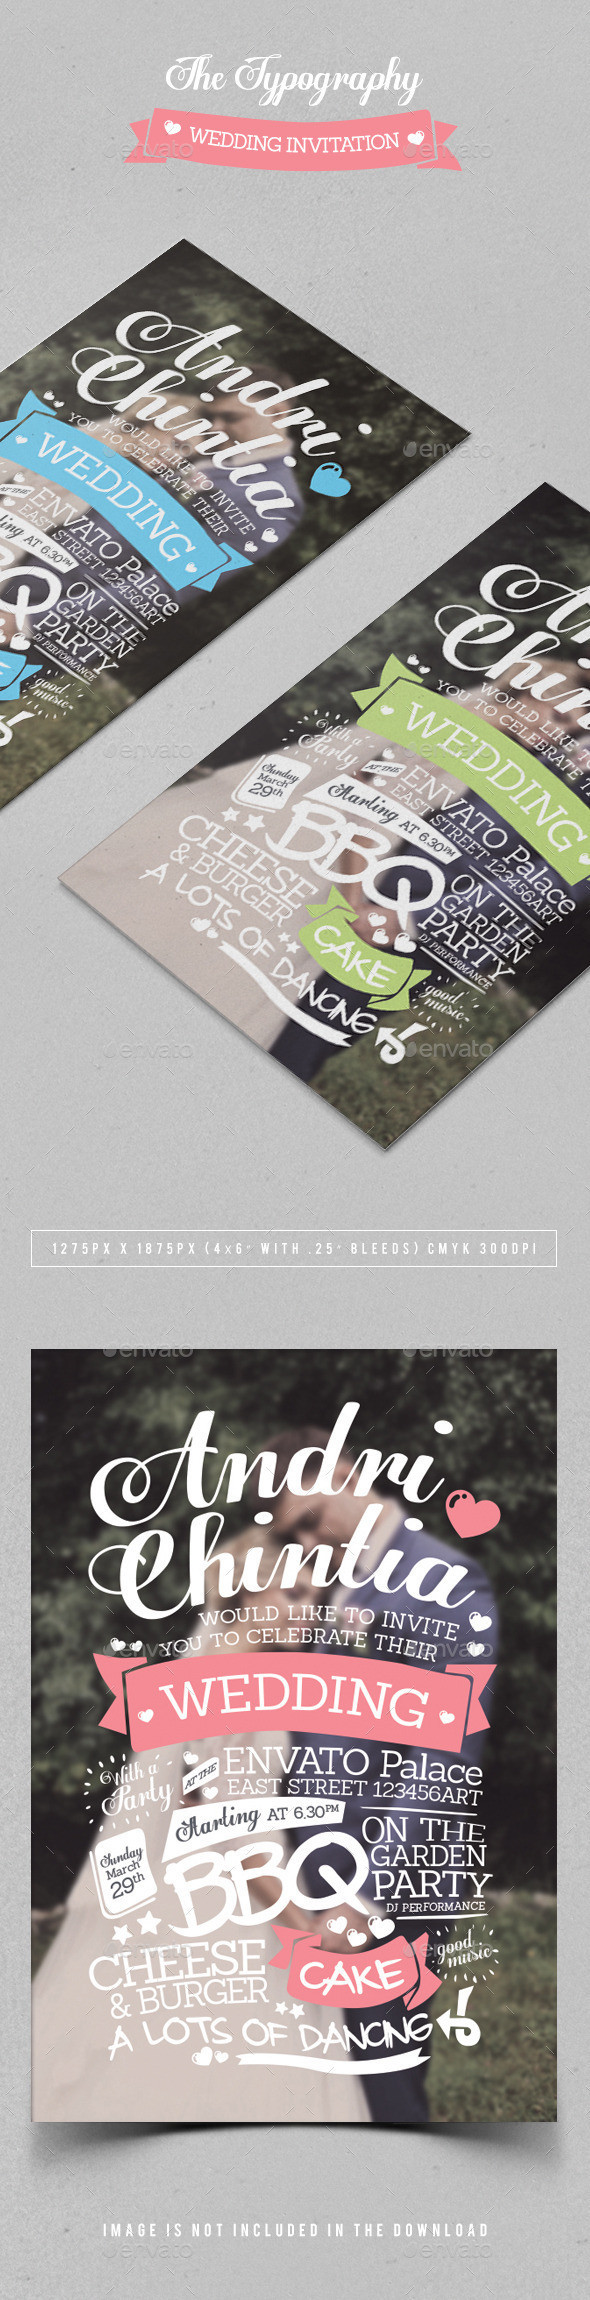 The typography wedding invitation preview